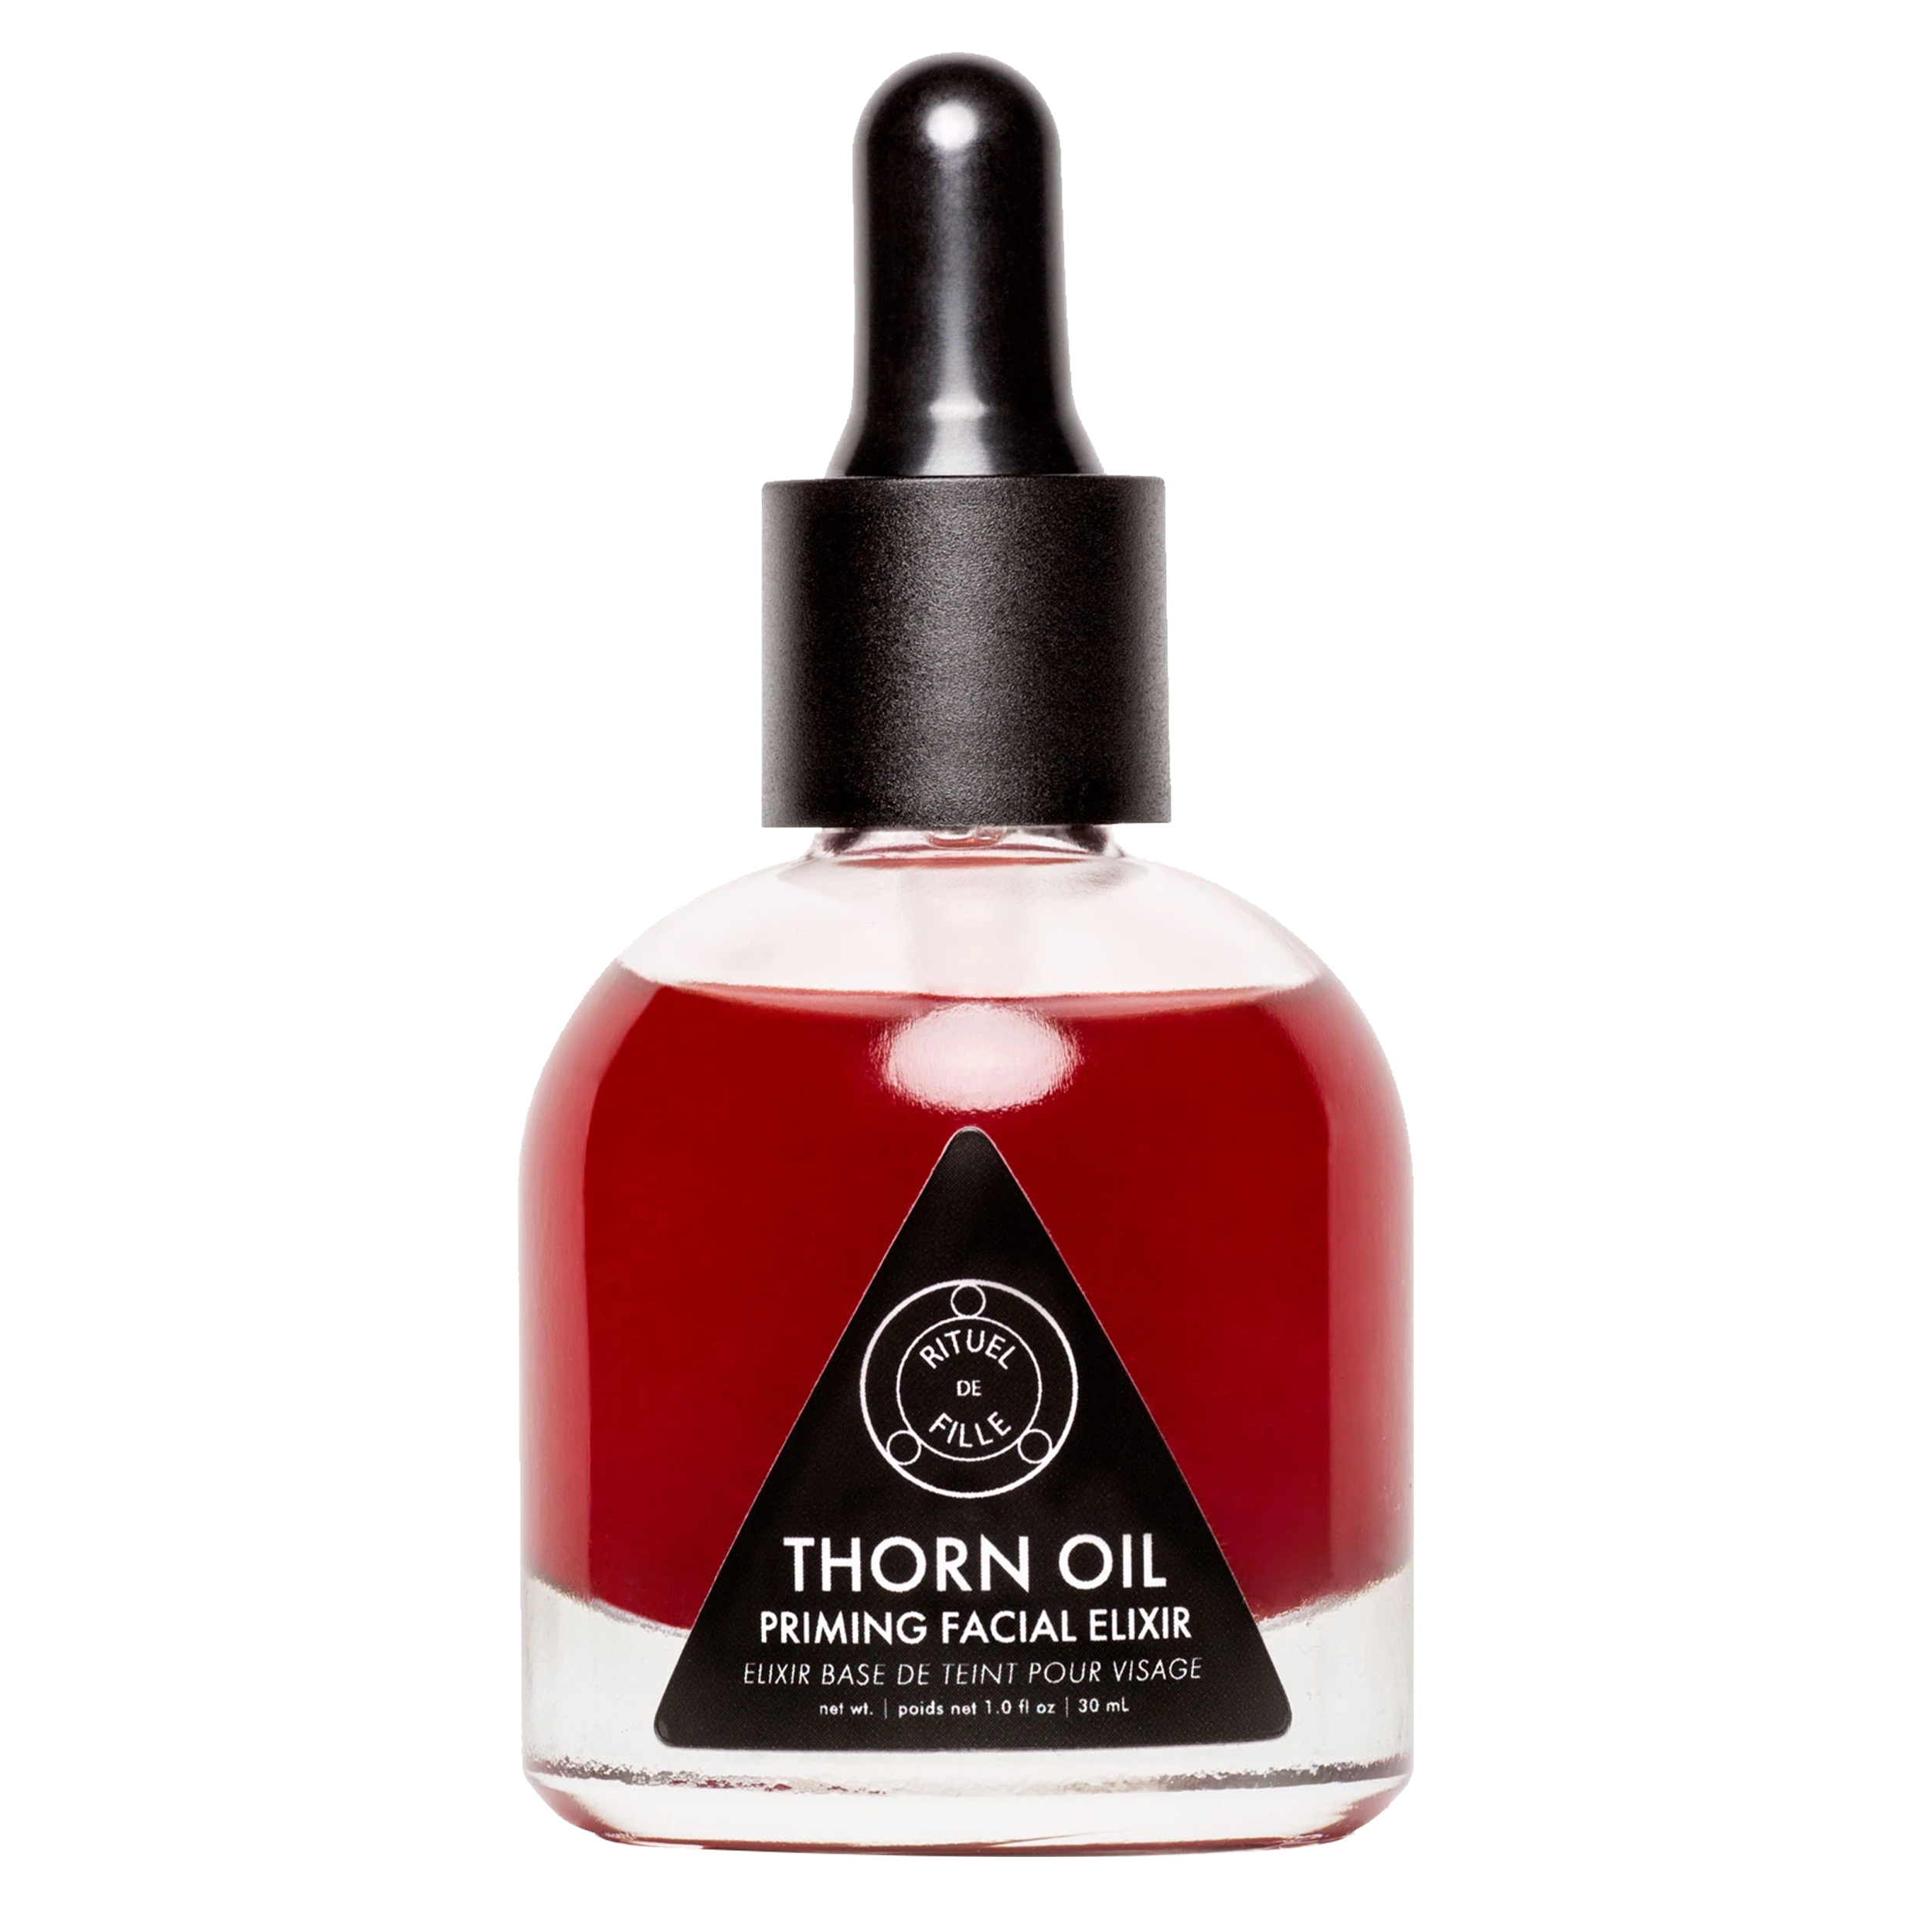 Thorn Oil Priming Facial Elixir by Rituel De Fille available online in Canada at Socialite Beauty.